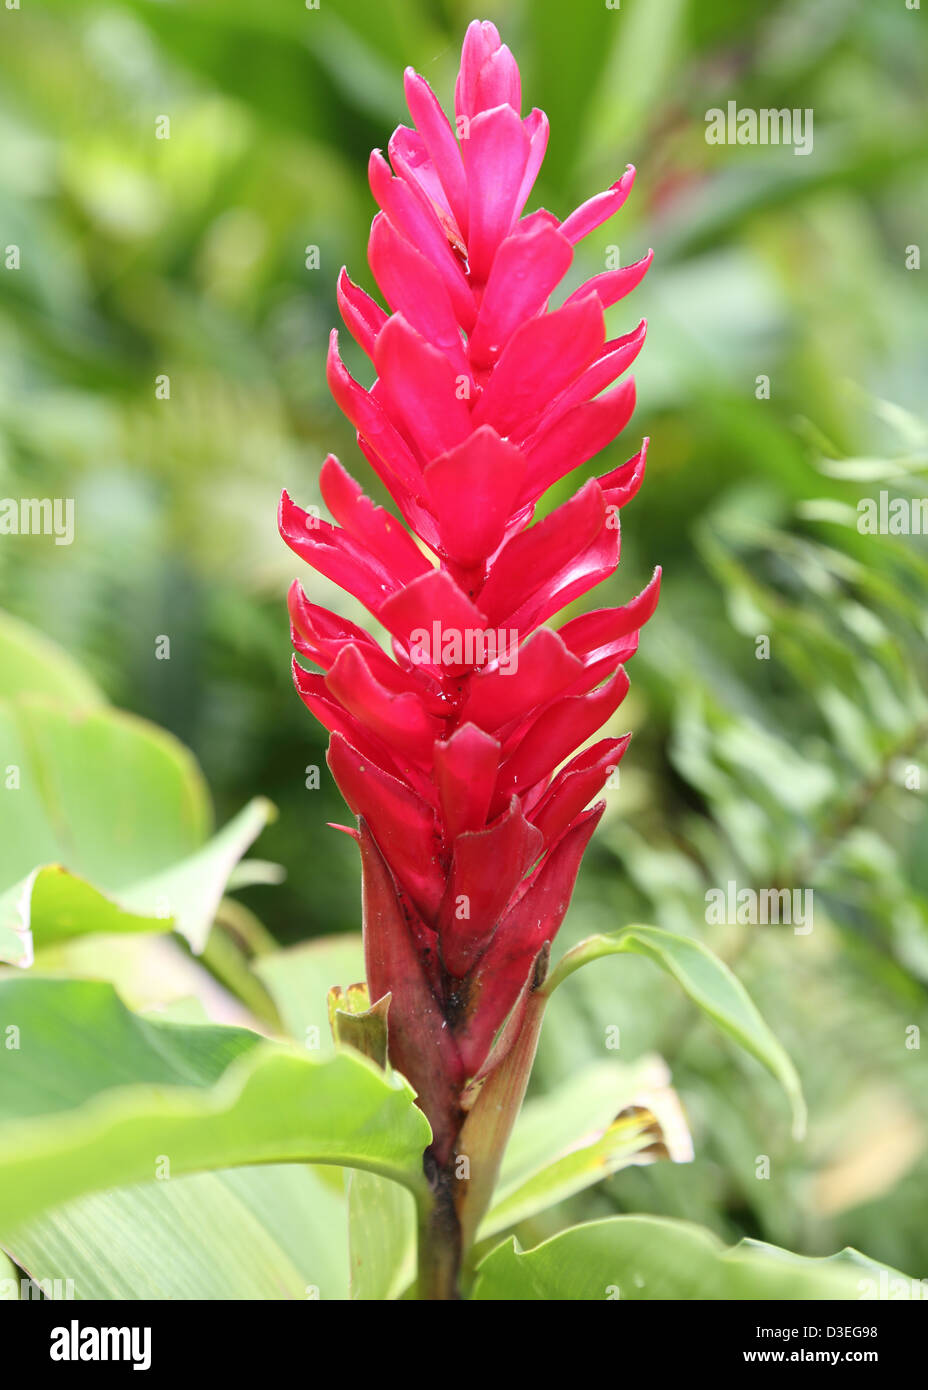 RED GINGER PLANT,BARBADE Banque D'Images